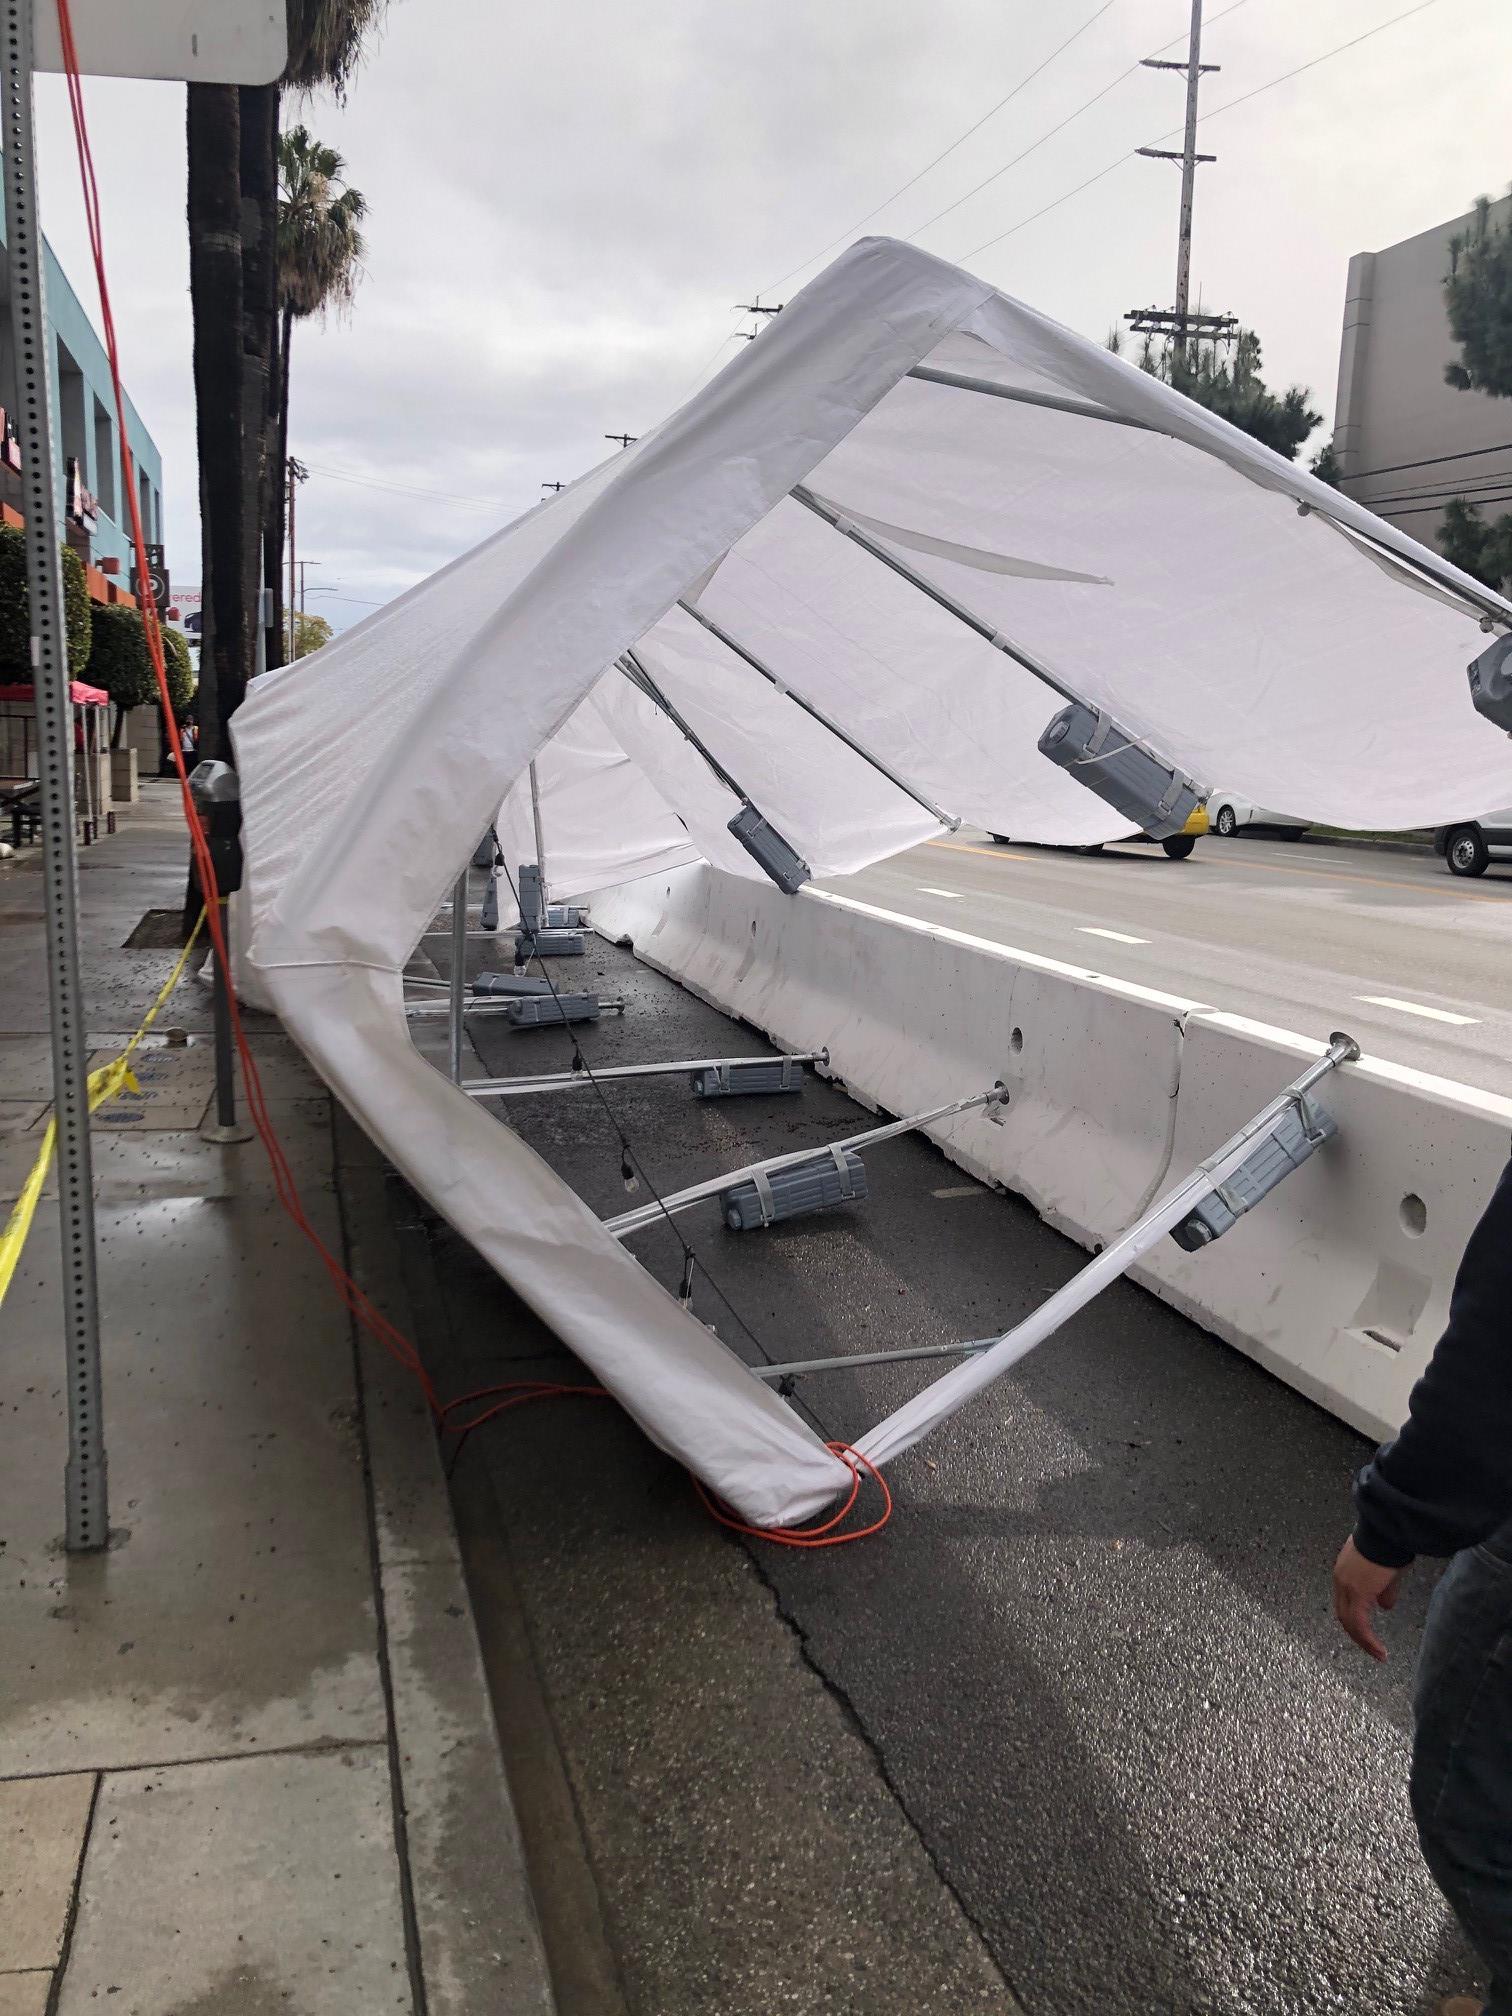 Collapsed outdoor dining canopy